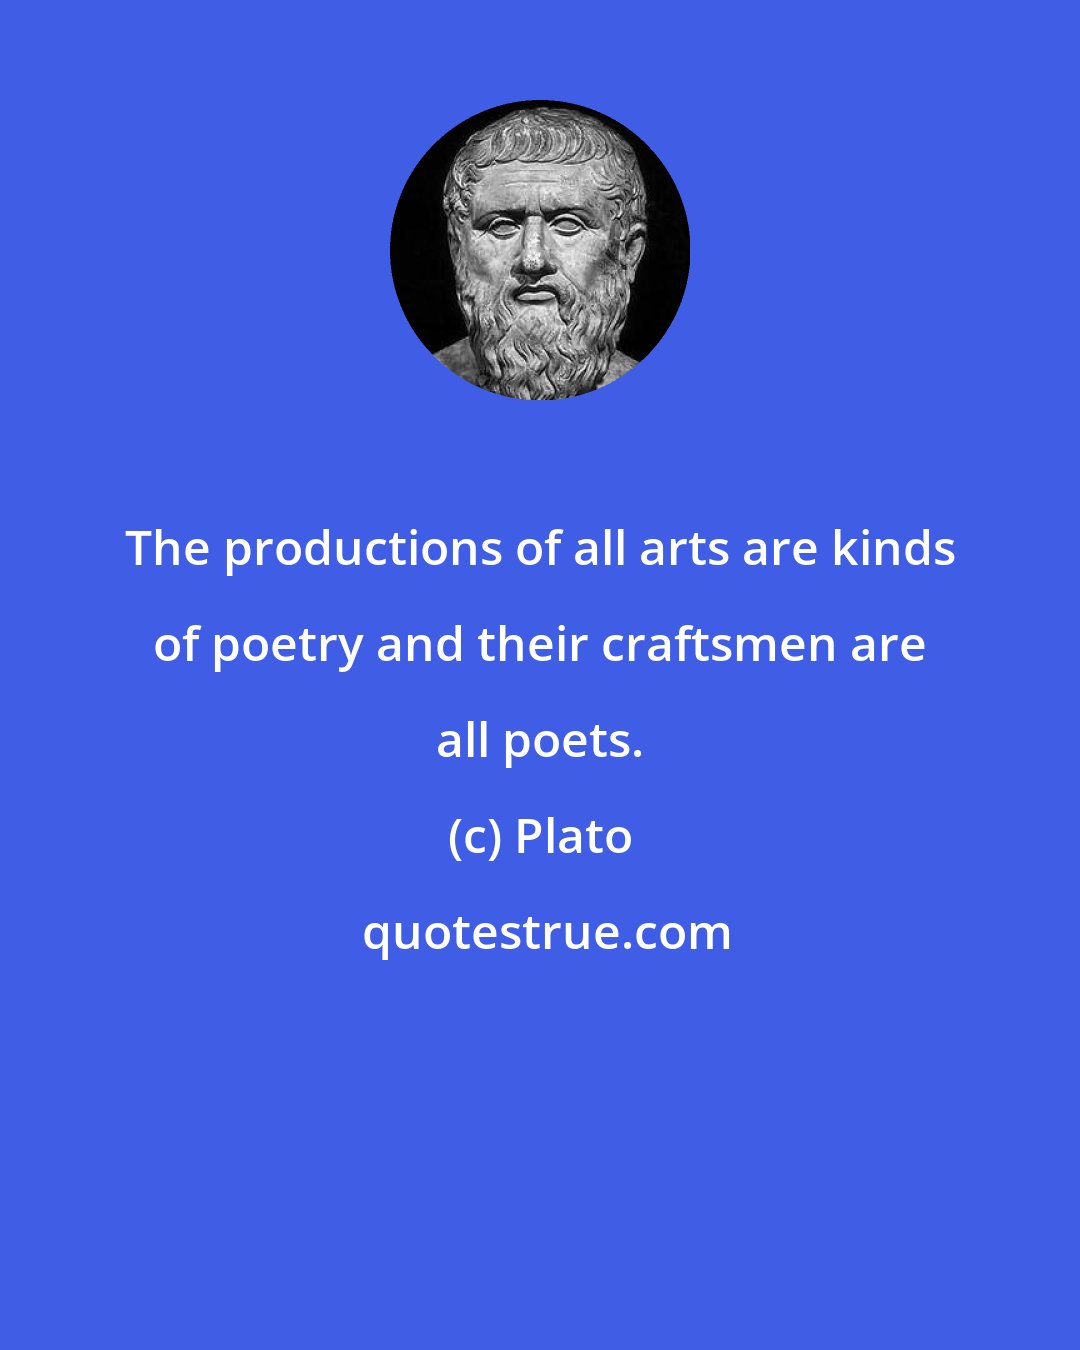 Plato: The productions of all arts are kinds of poetry and their craftsmen are all poets.